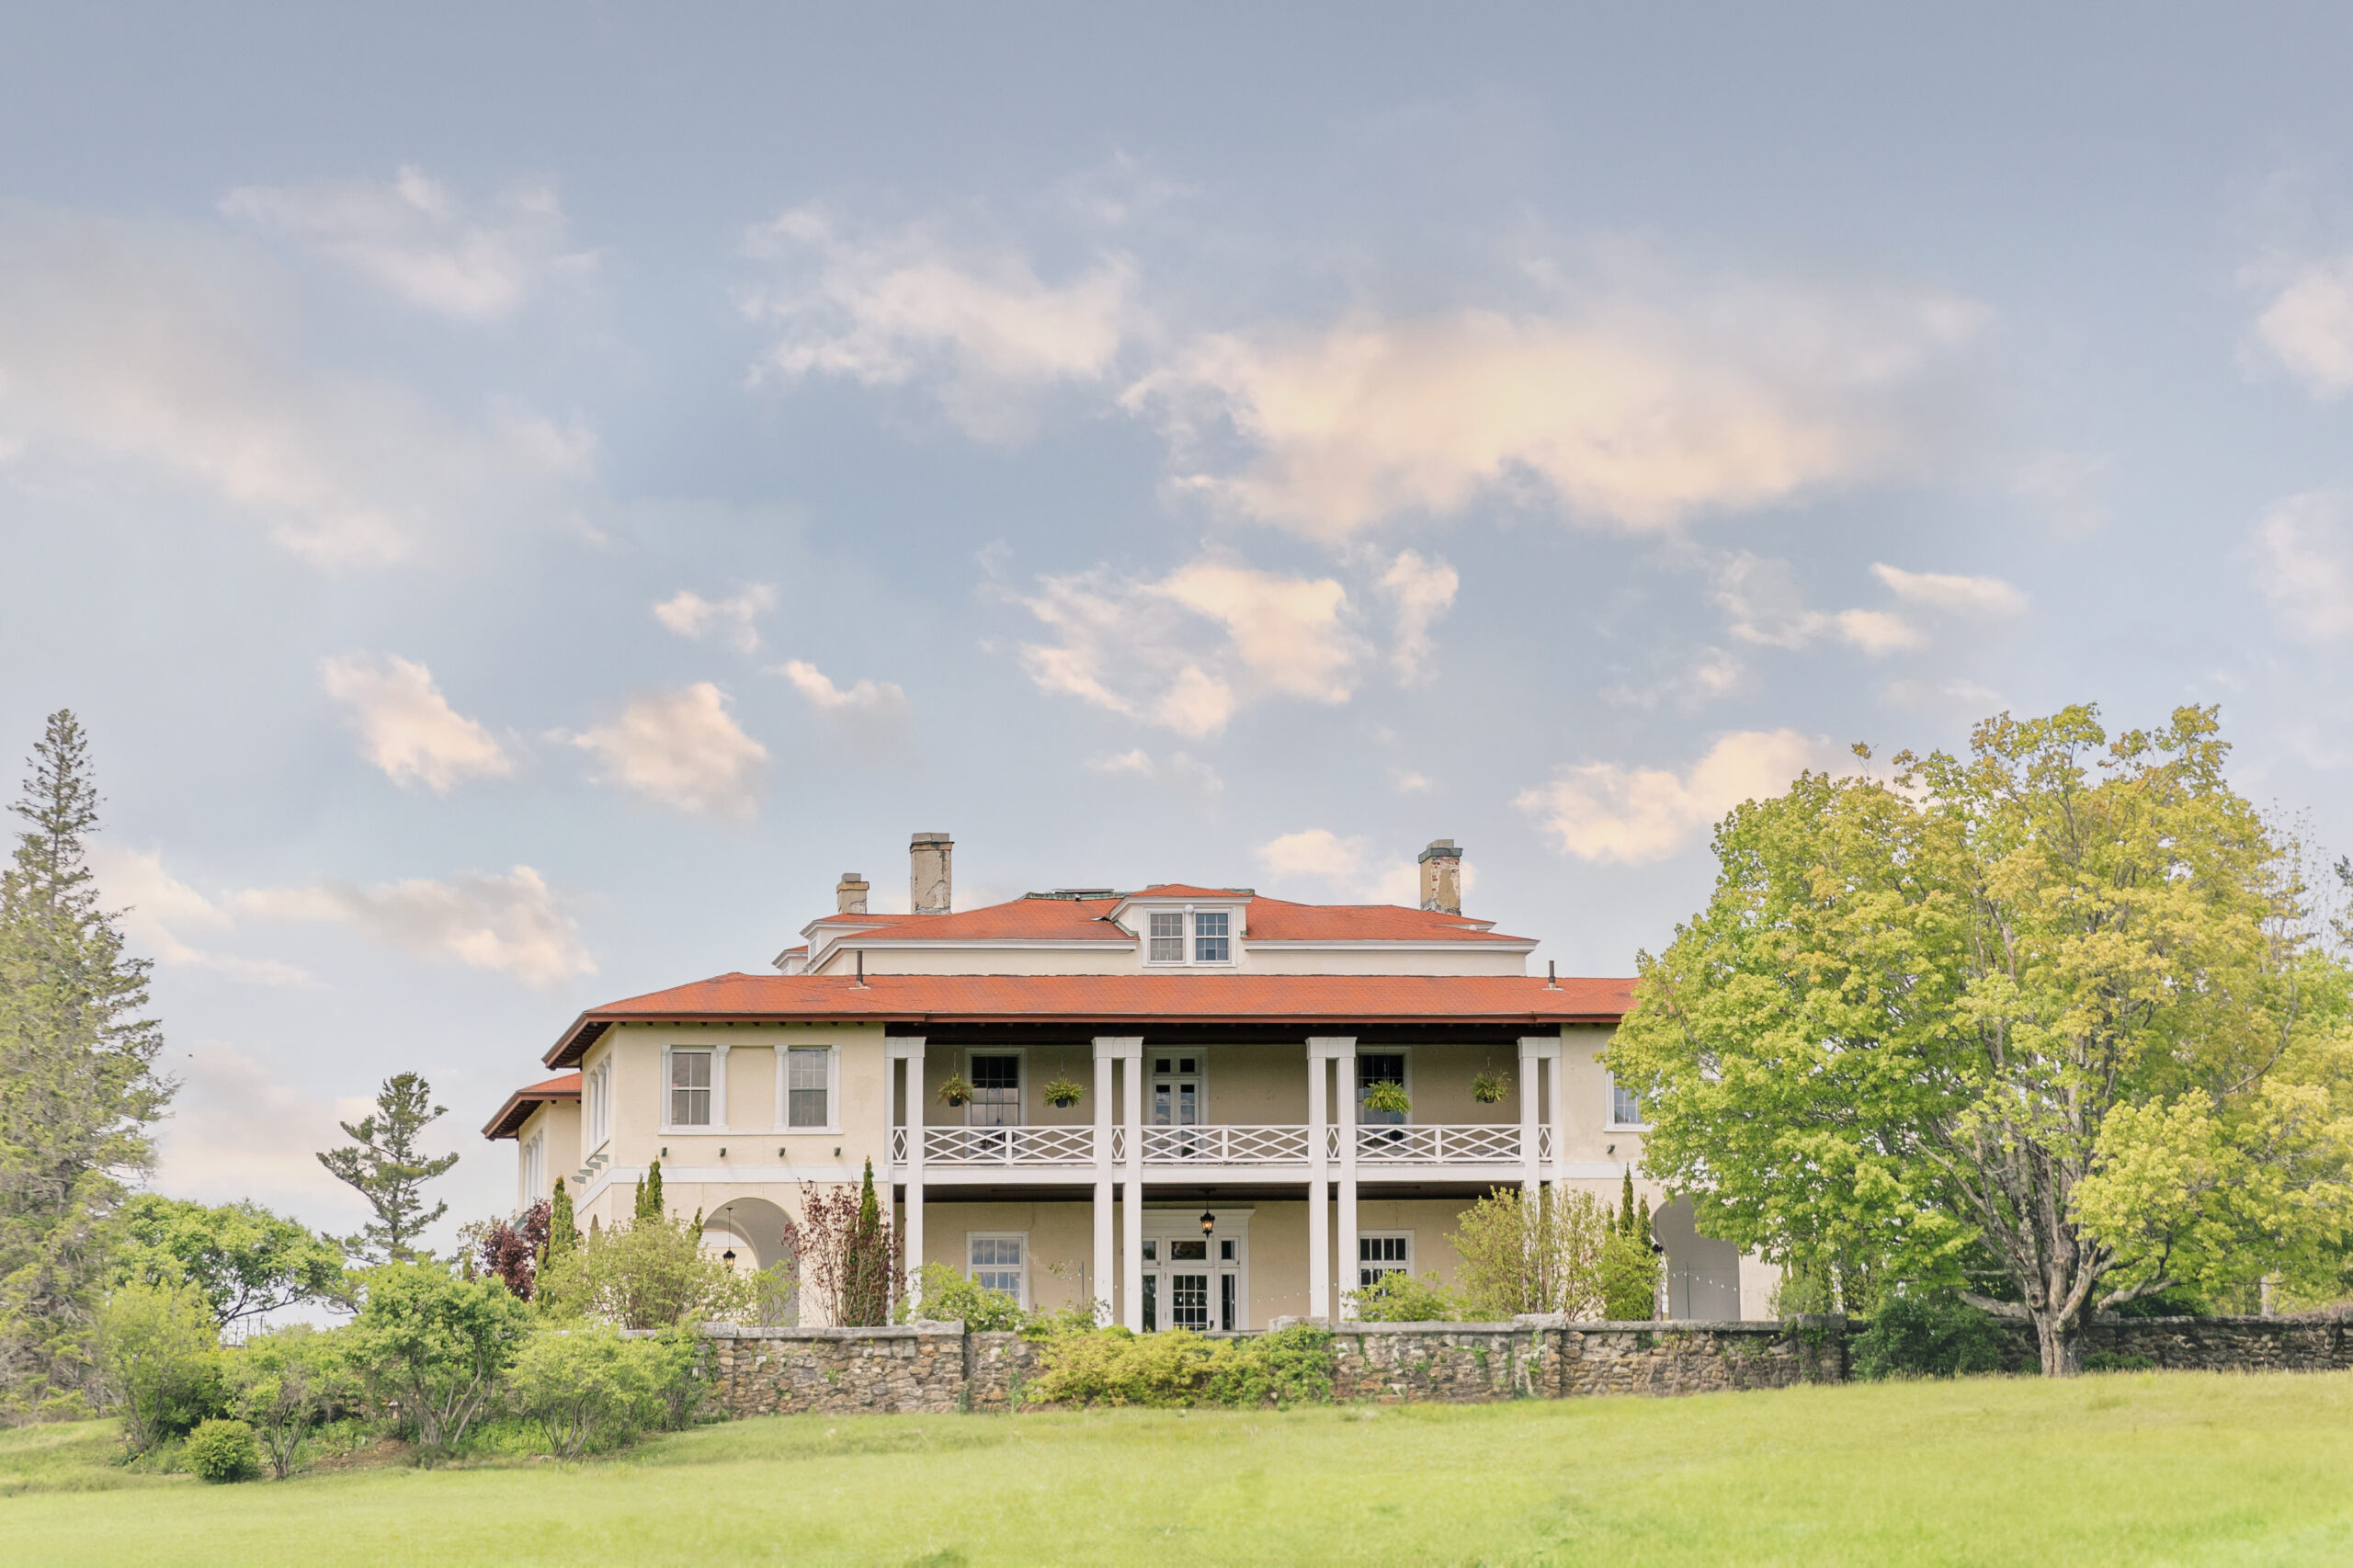 Aldworth Manor is a mansion wedding venue located in the picturesque countryside of Harrisville, New Hampshire.